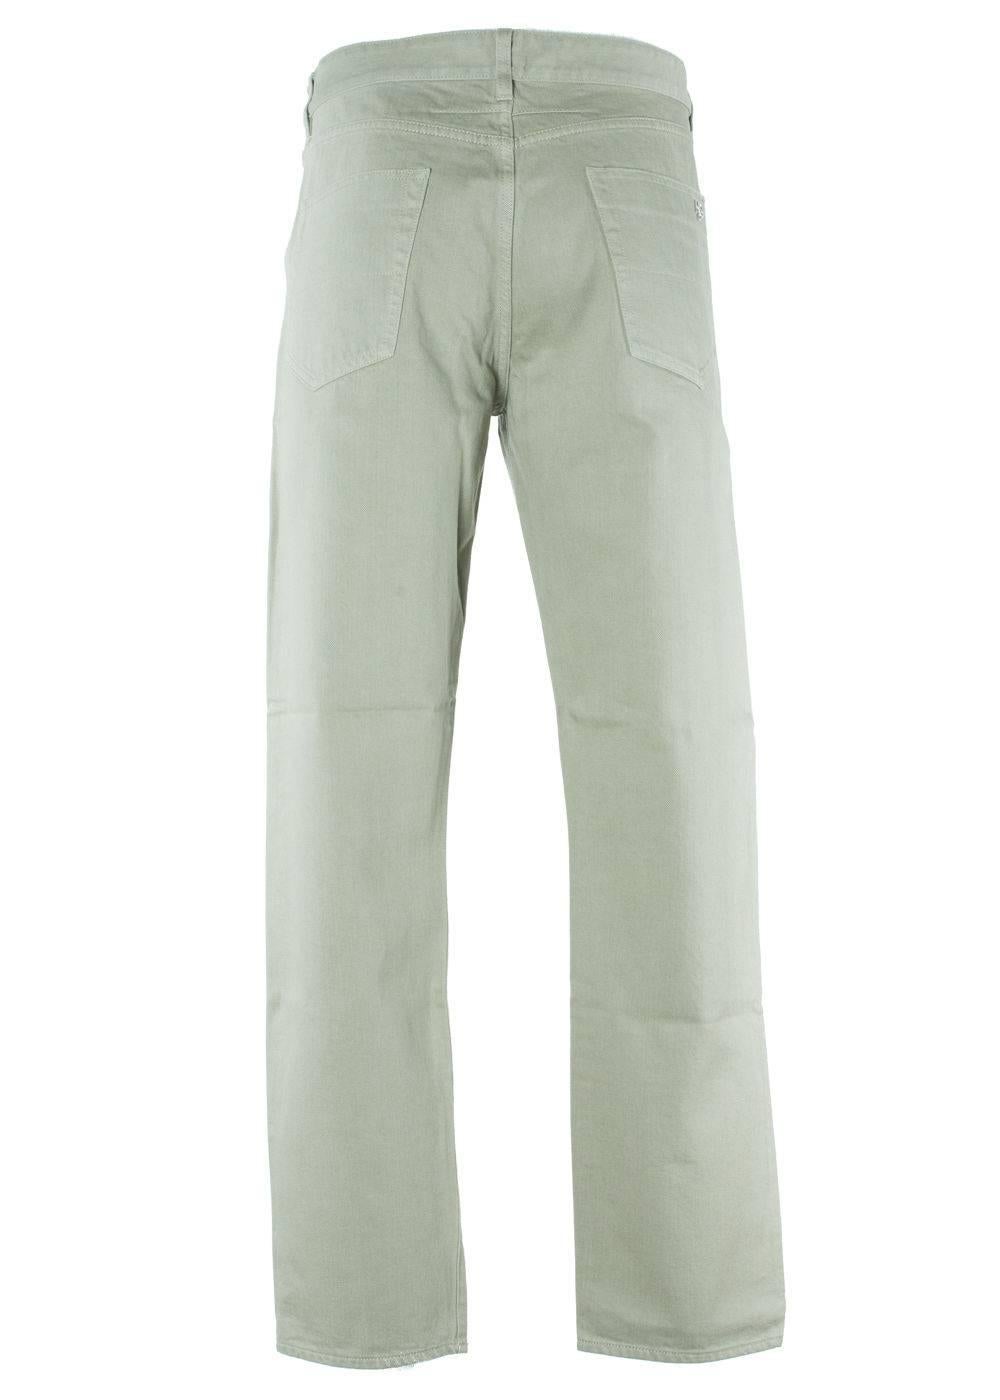 Brand New Givenchy Men's Corduroys
Original Tag
Retails in Stores & Online for $510
Men's Size US 35 Fits True to Size

Corduroy silhouette pants are a must have for any man's closet on all four season. These light olive corduroys are super